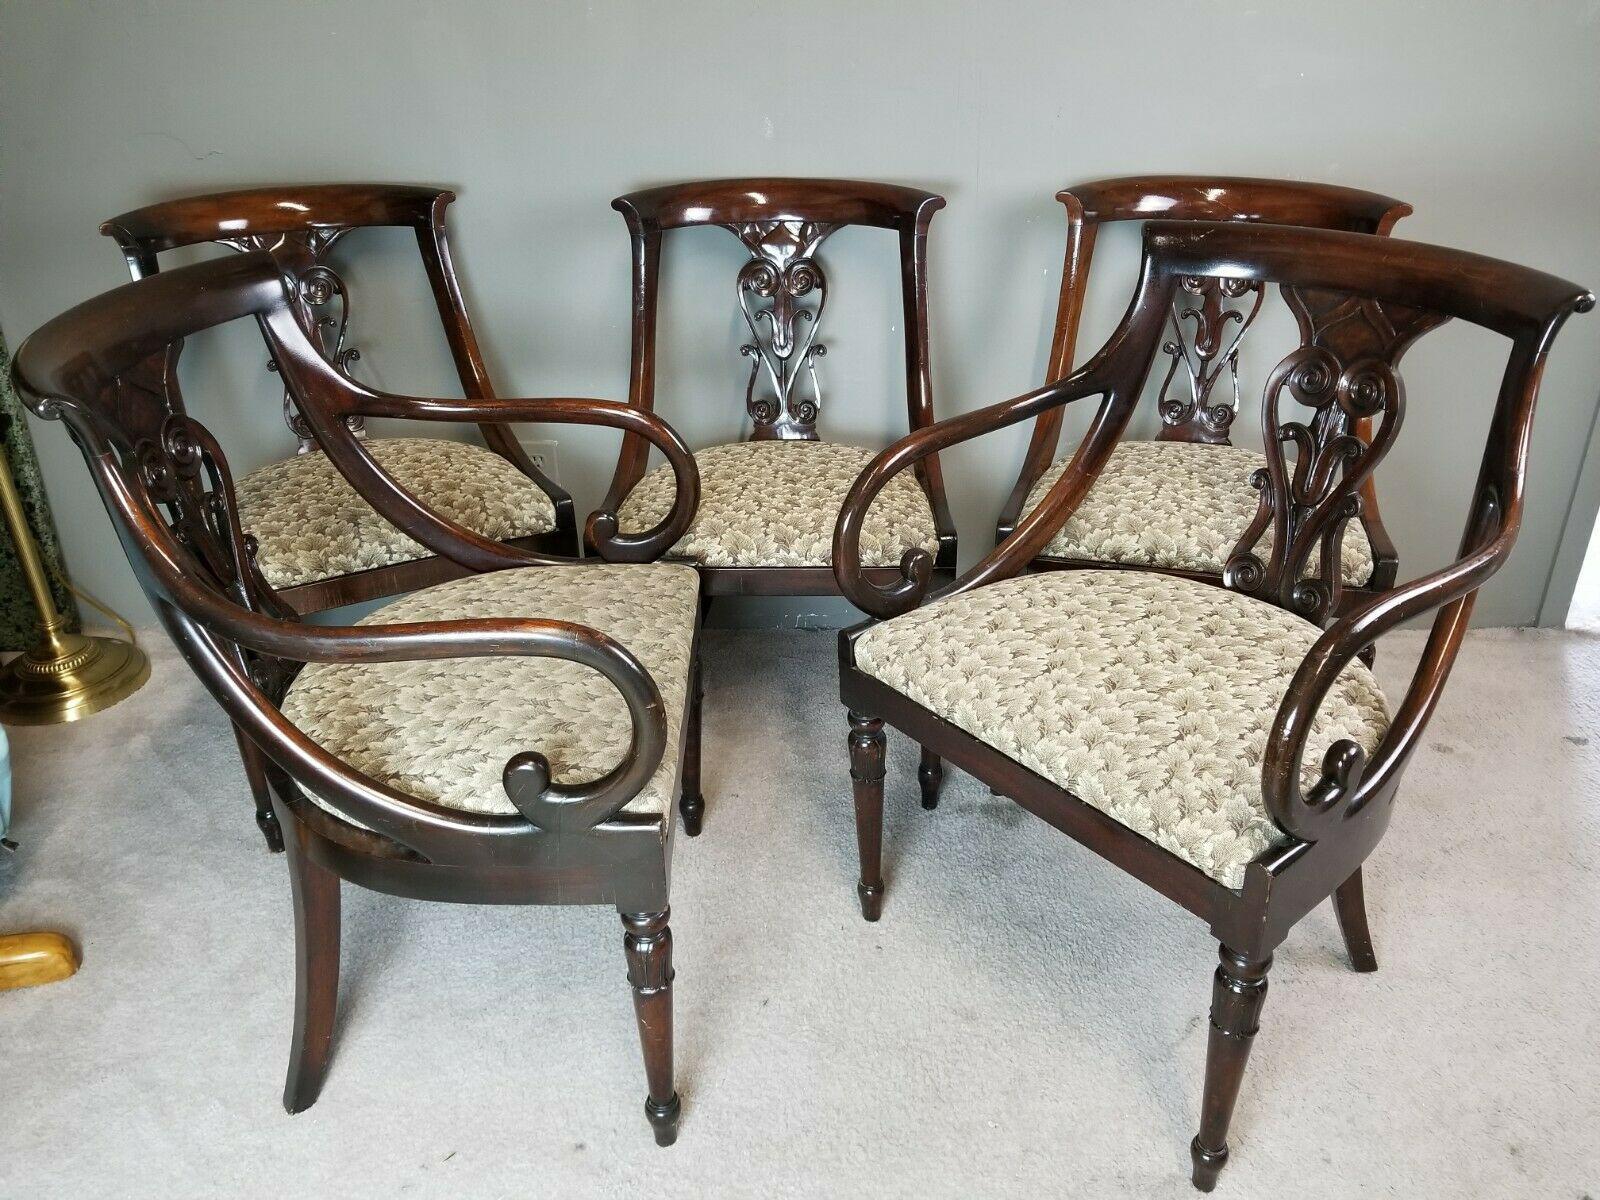 Antique English Regency Solid Mahogany Scroll Arm Dining Chairs, Set of 5 For Sale 9